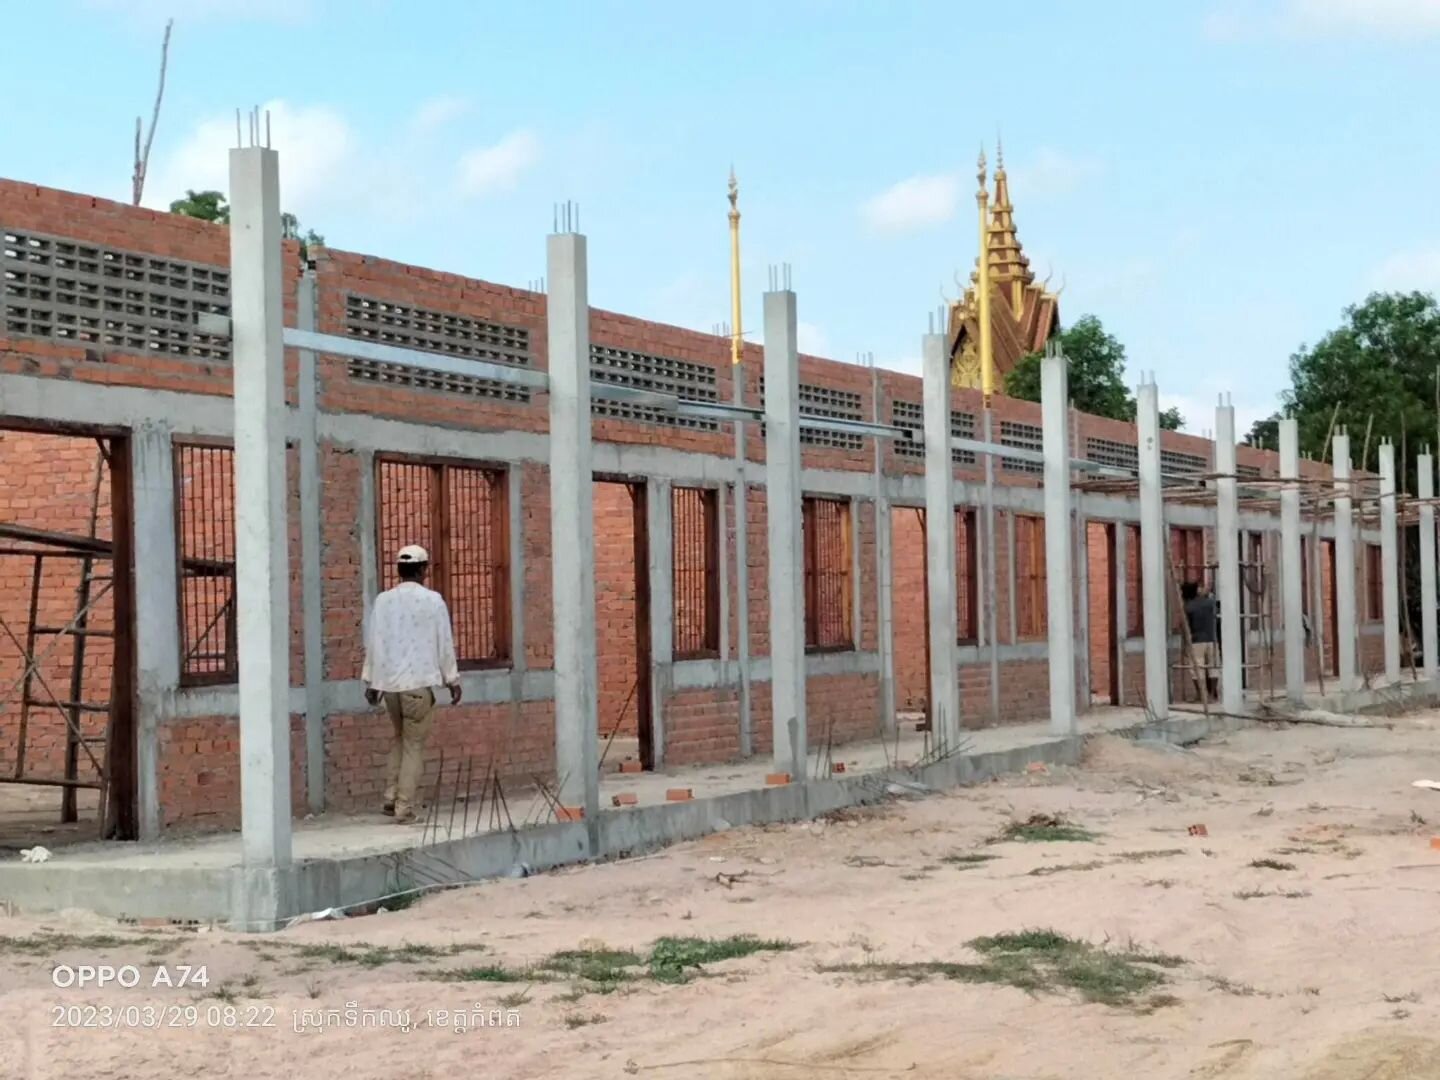 Post 2 

It has been less than ten week&rsquo;s since we first stepped on site at Oddon Meachey Primary&nbsp;School in Kampot to begin the build of the secondary school there and we are blown away&nbsp;by the progress the team of builders have made s